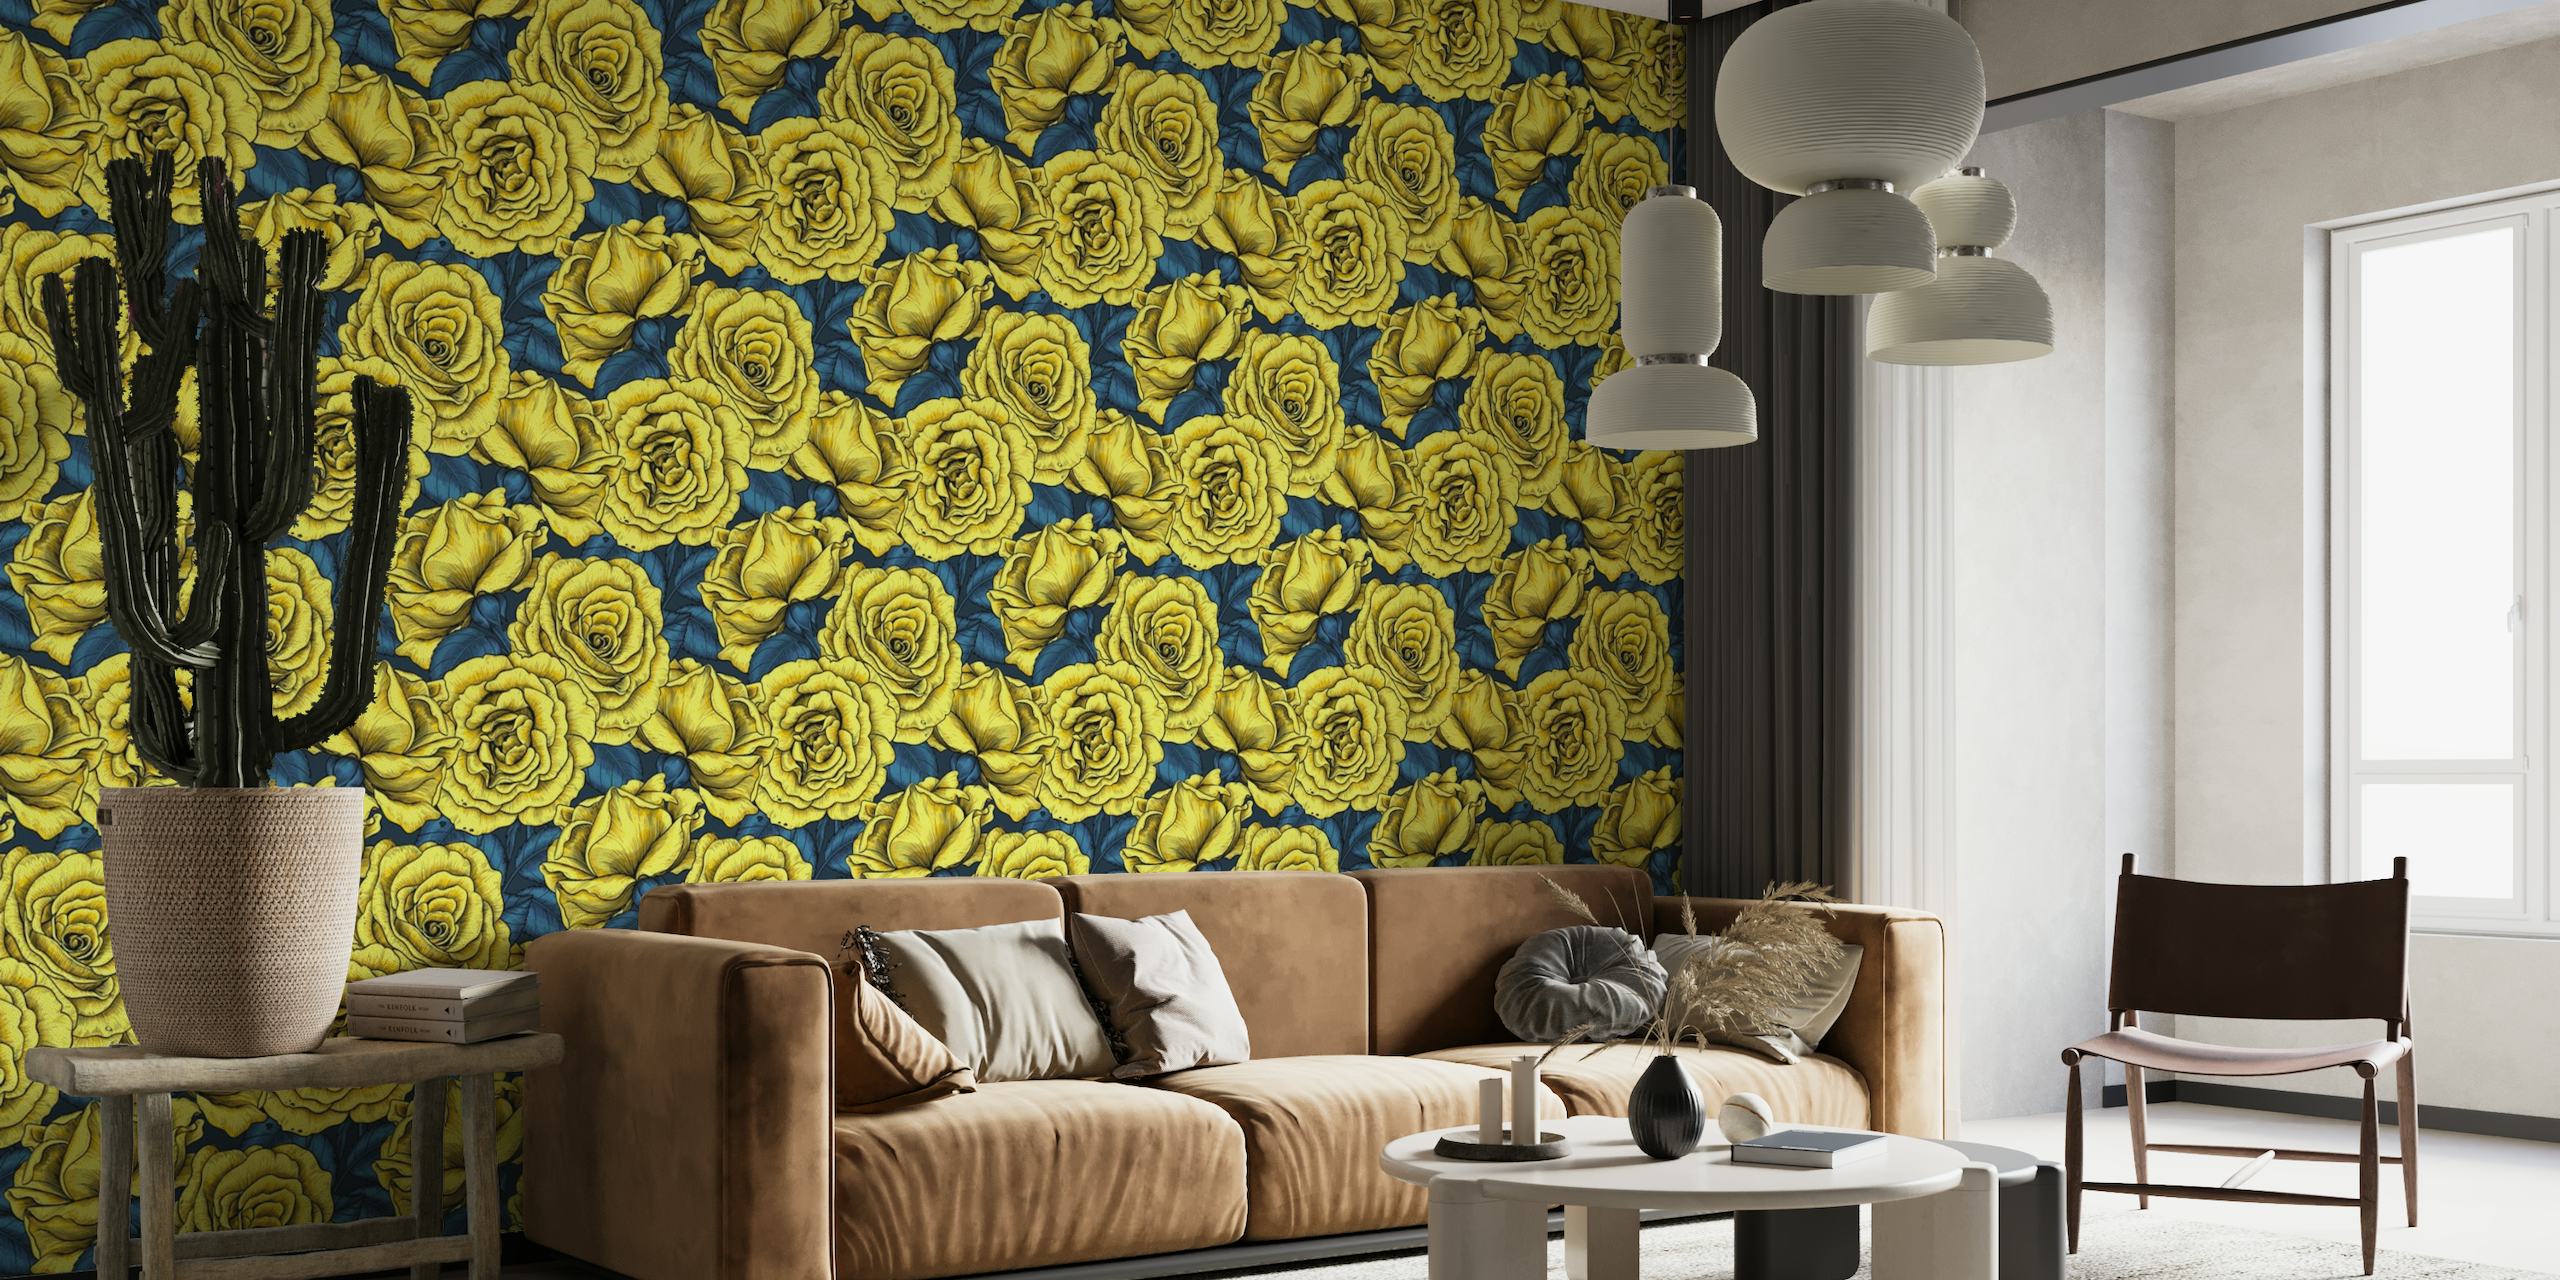 Yellow roses with blue leaves wallpaper